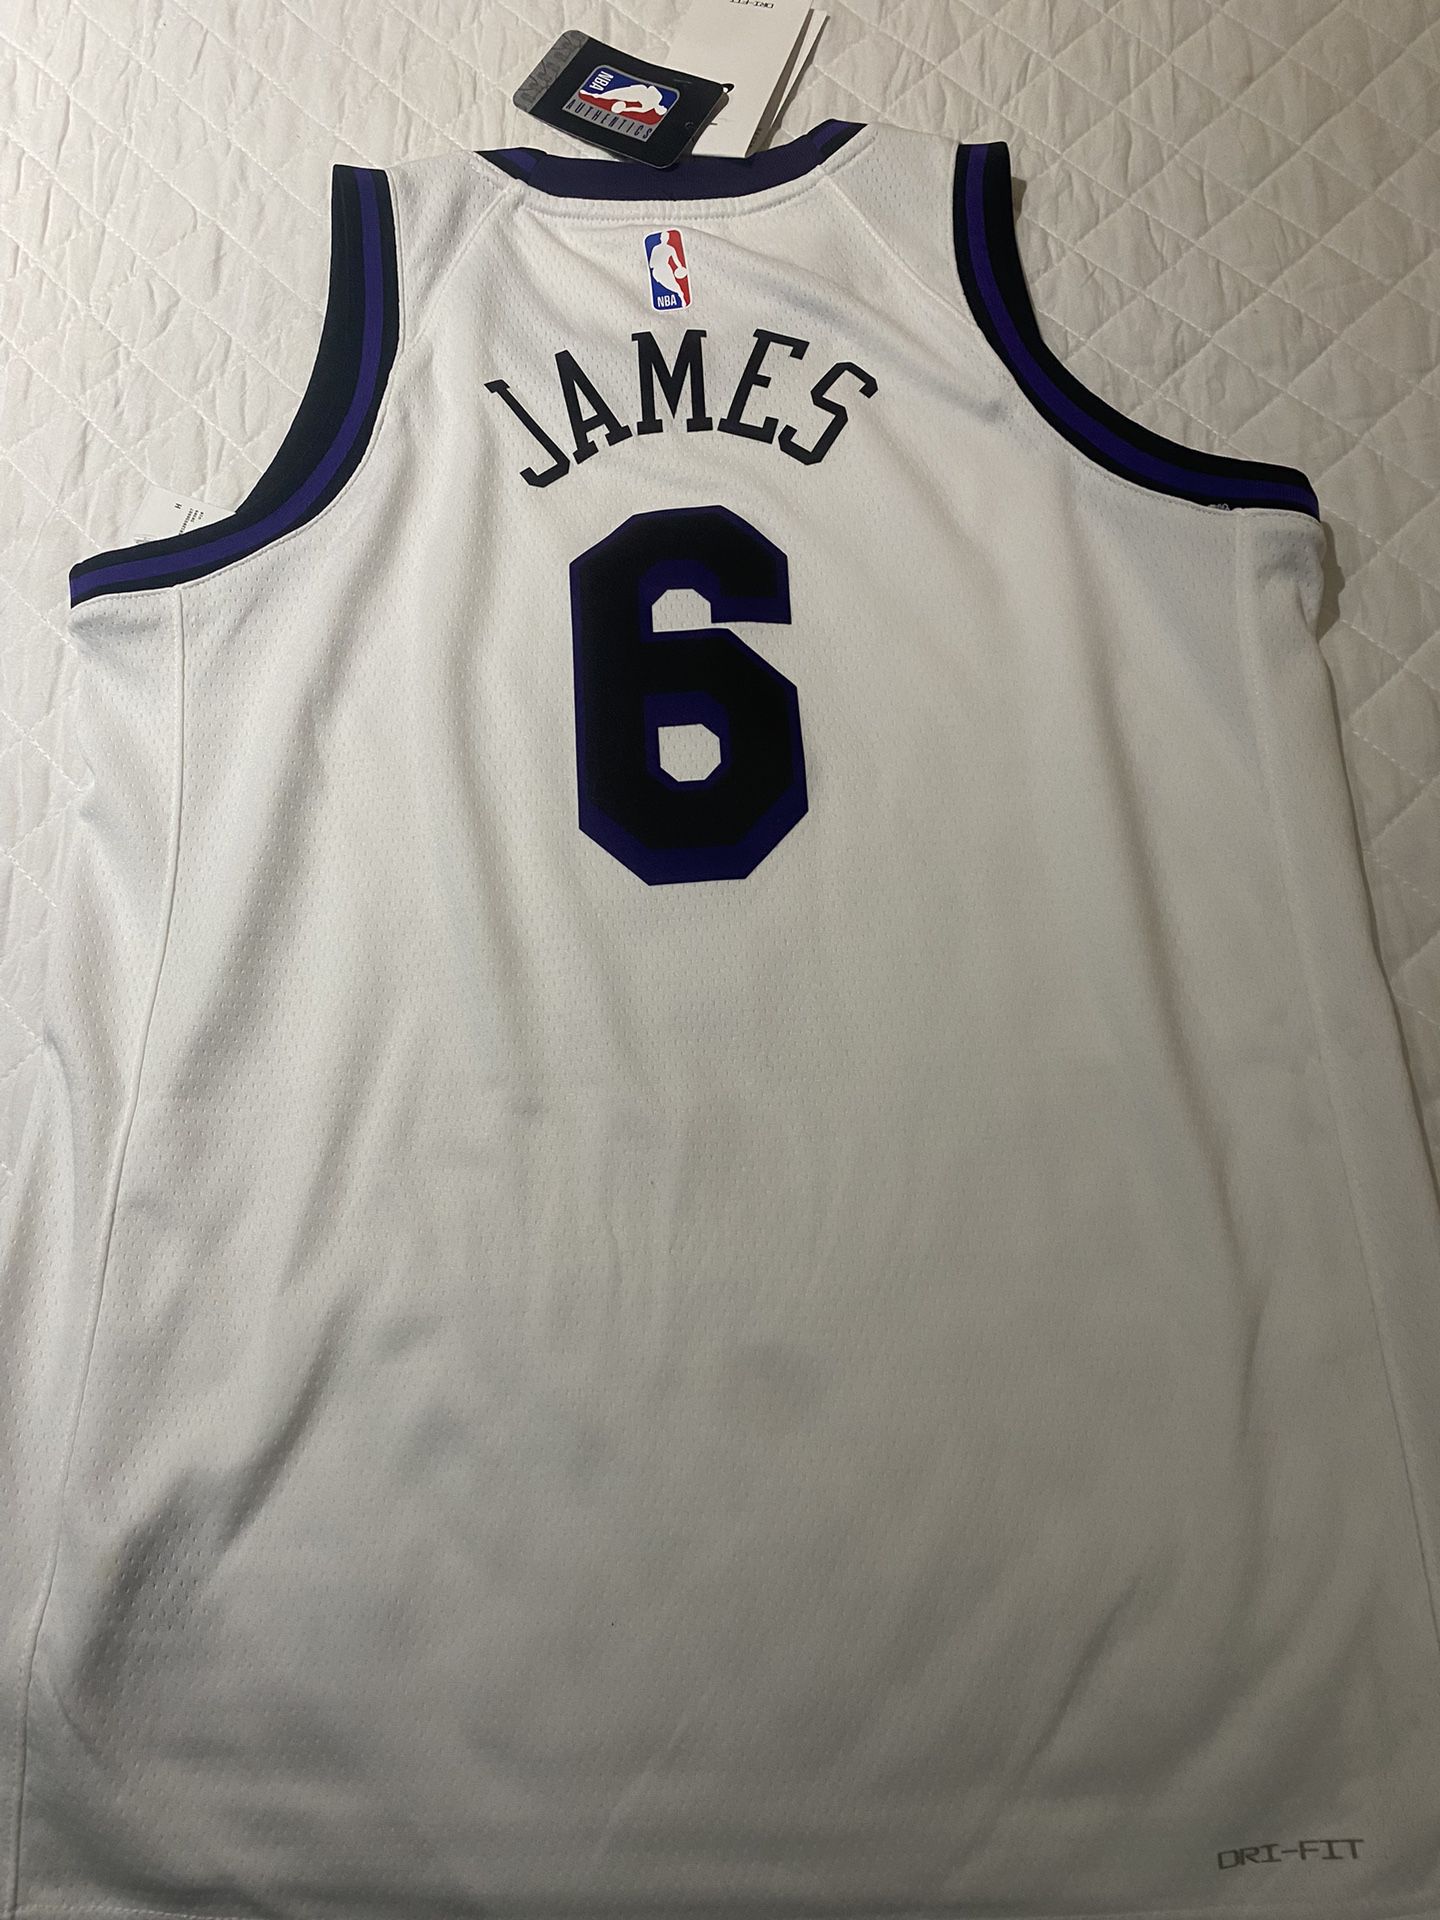 Youth LeBron James Los Angeles Lakers Jerseys for Sale in Crystal City, CA  - OfferUp